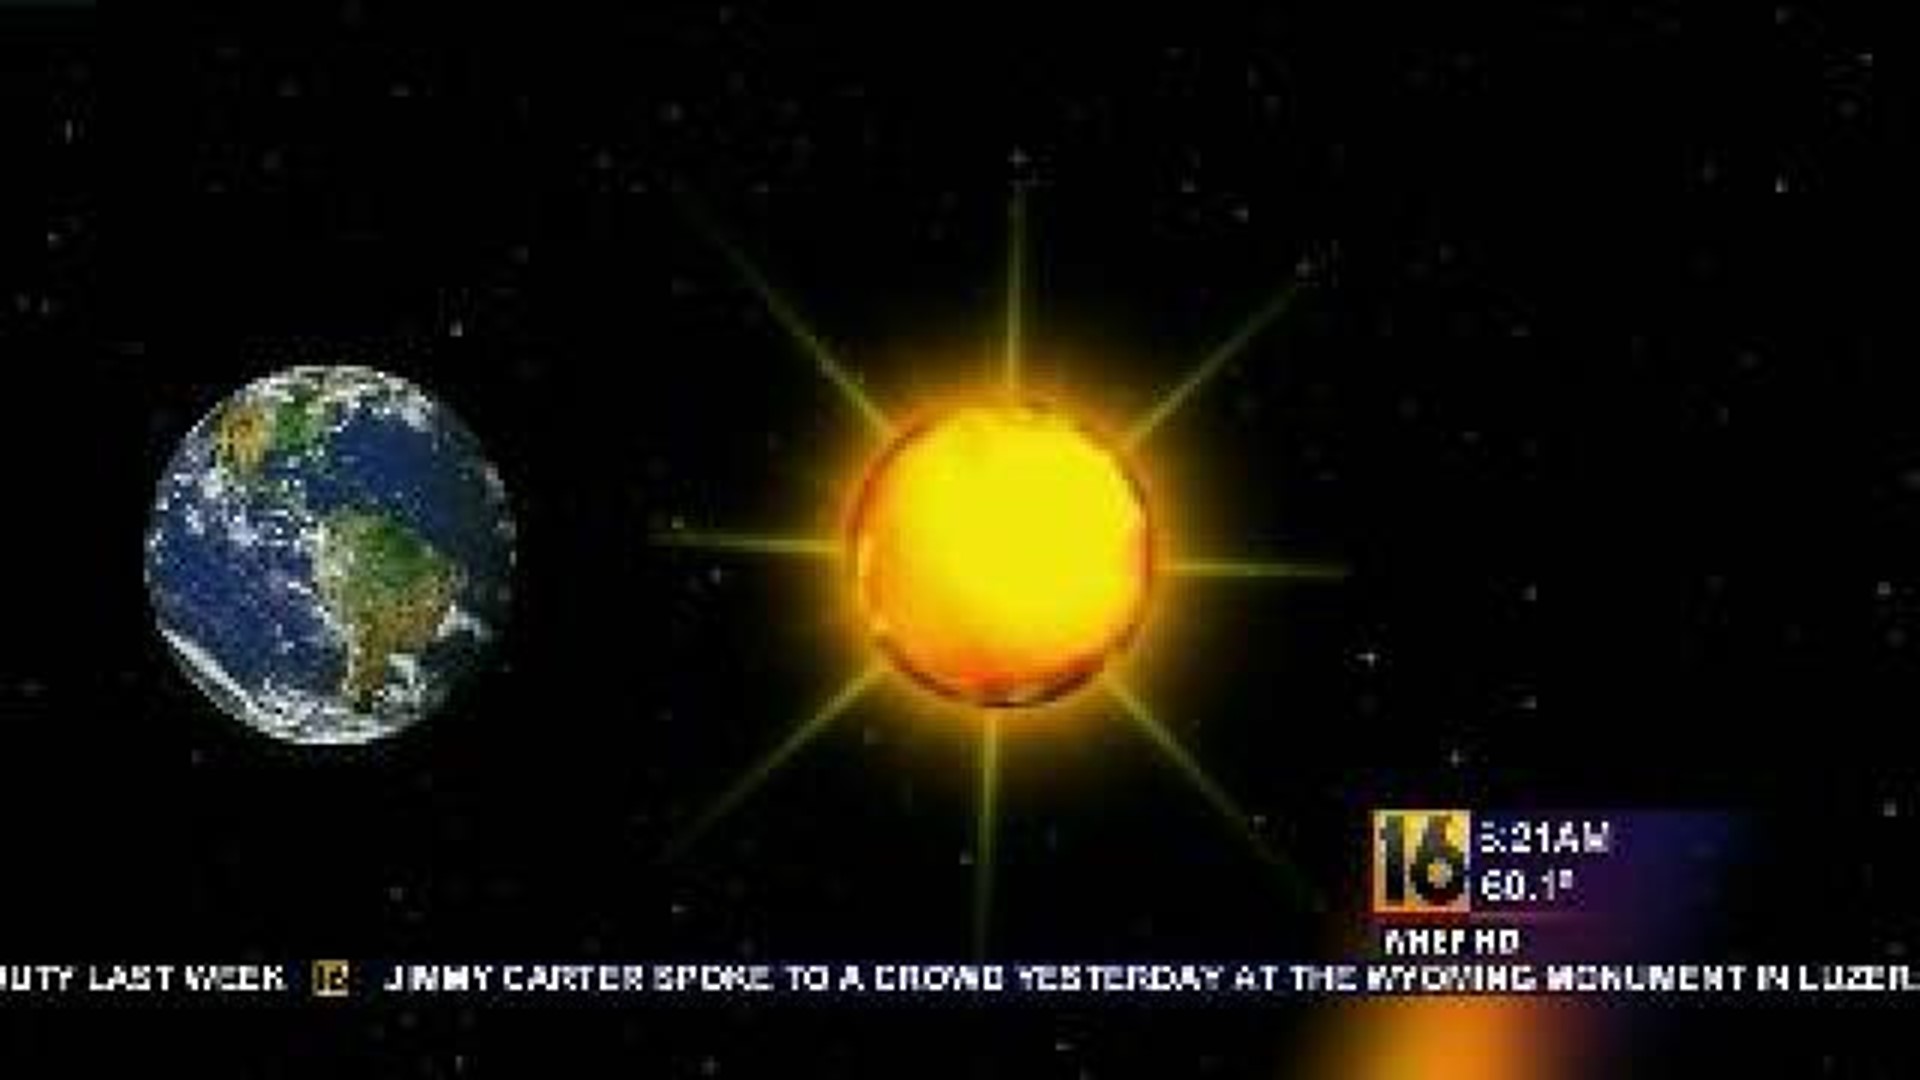 Wham Cam: How Fast Does Earth Travel?